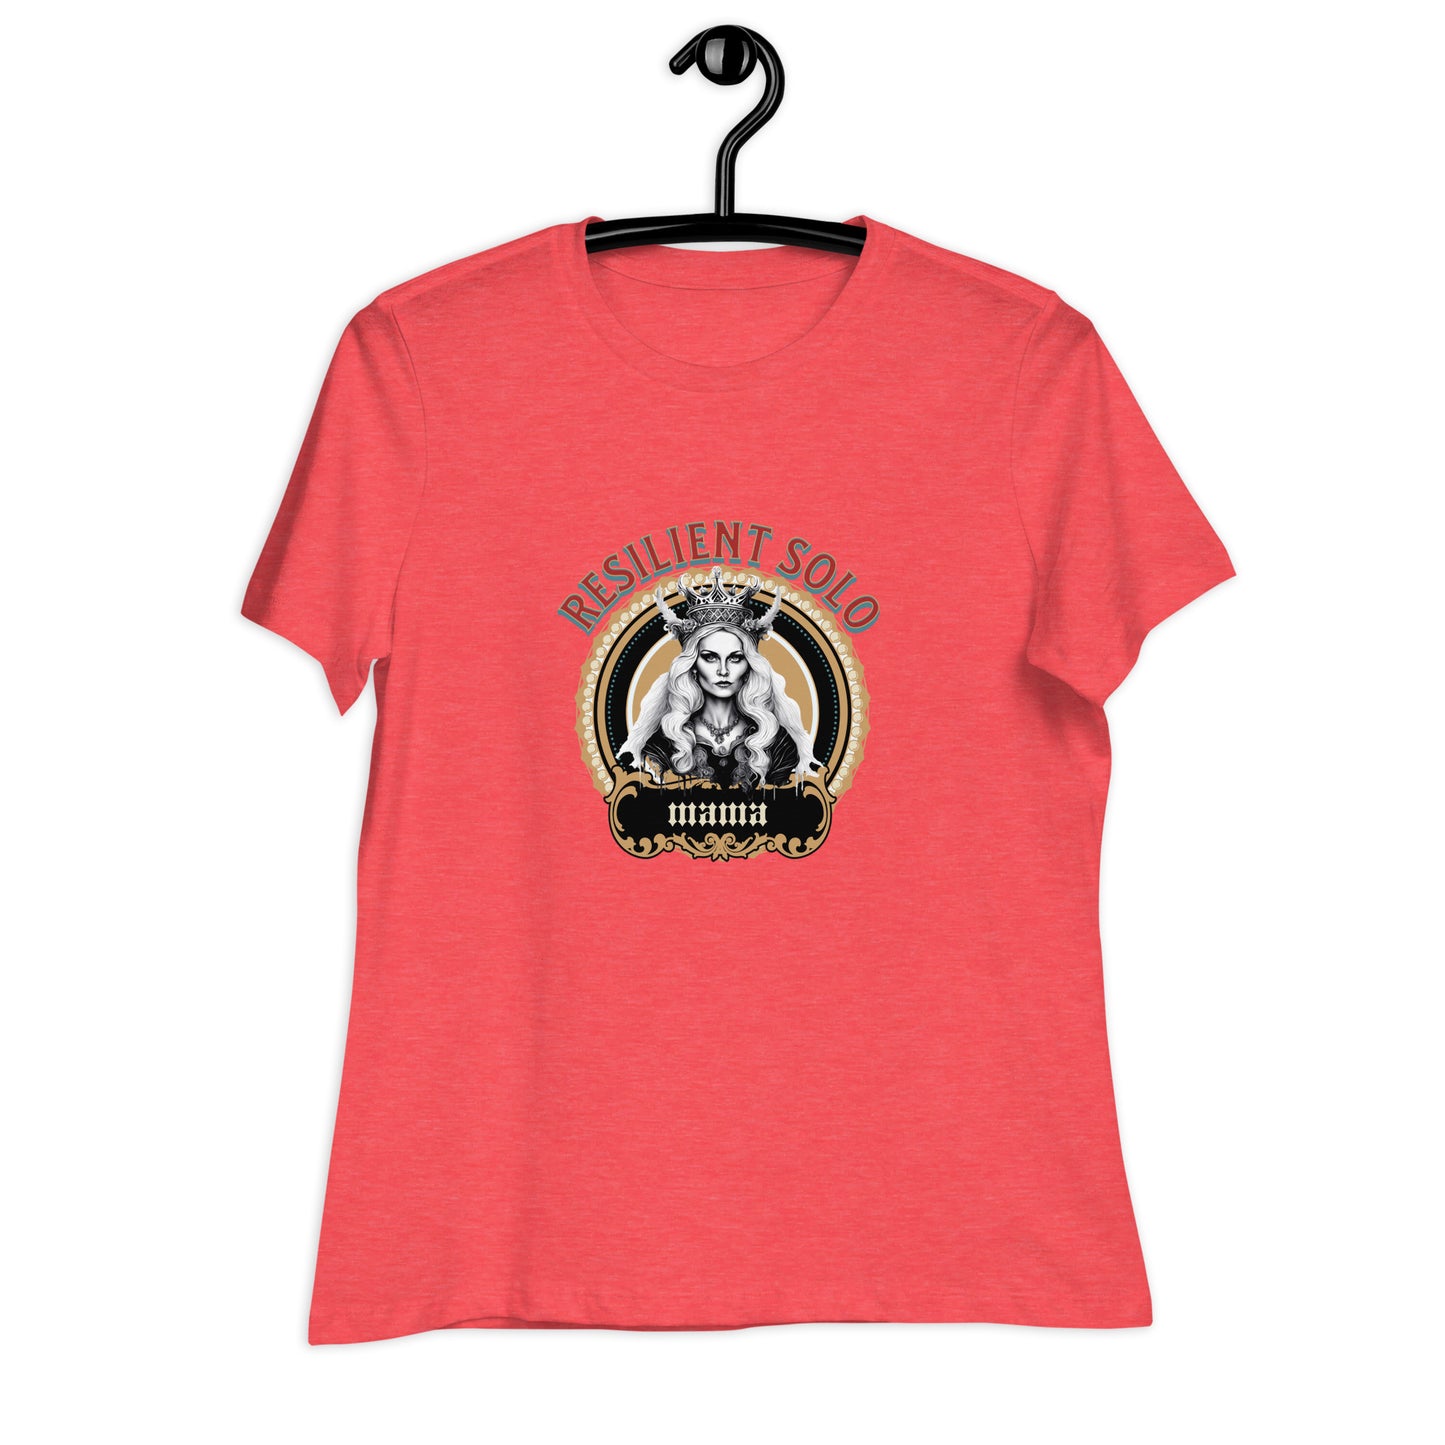 Resilient Solo Mama Women's Relaxed T-Shirt, Blonde Queen